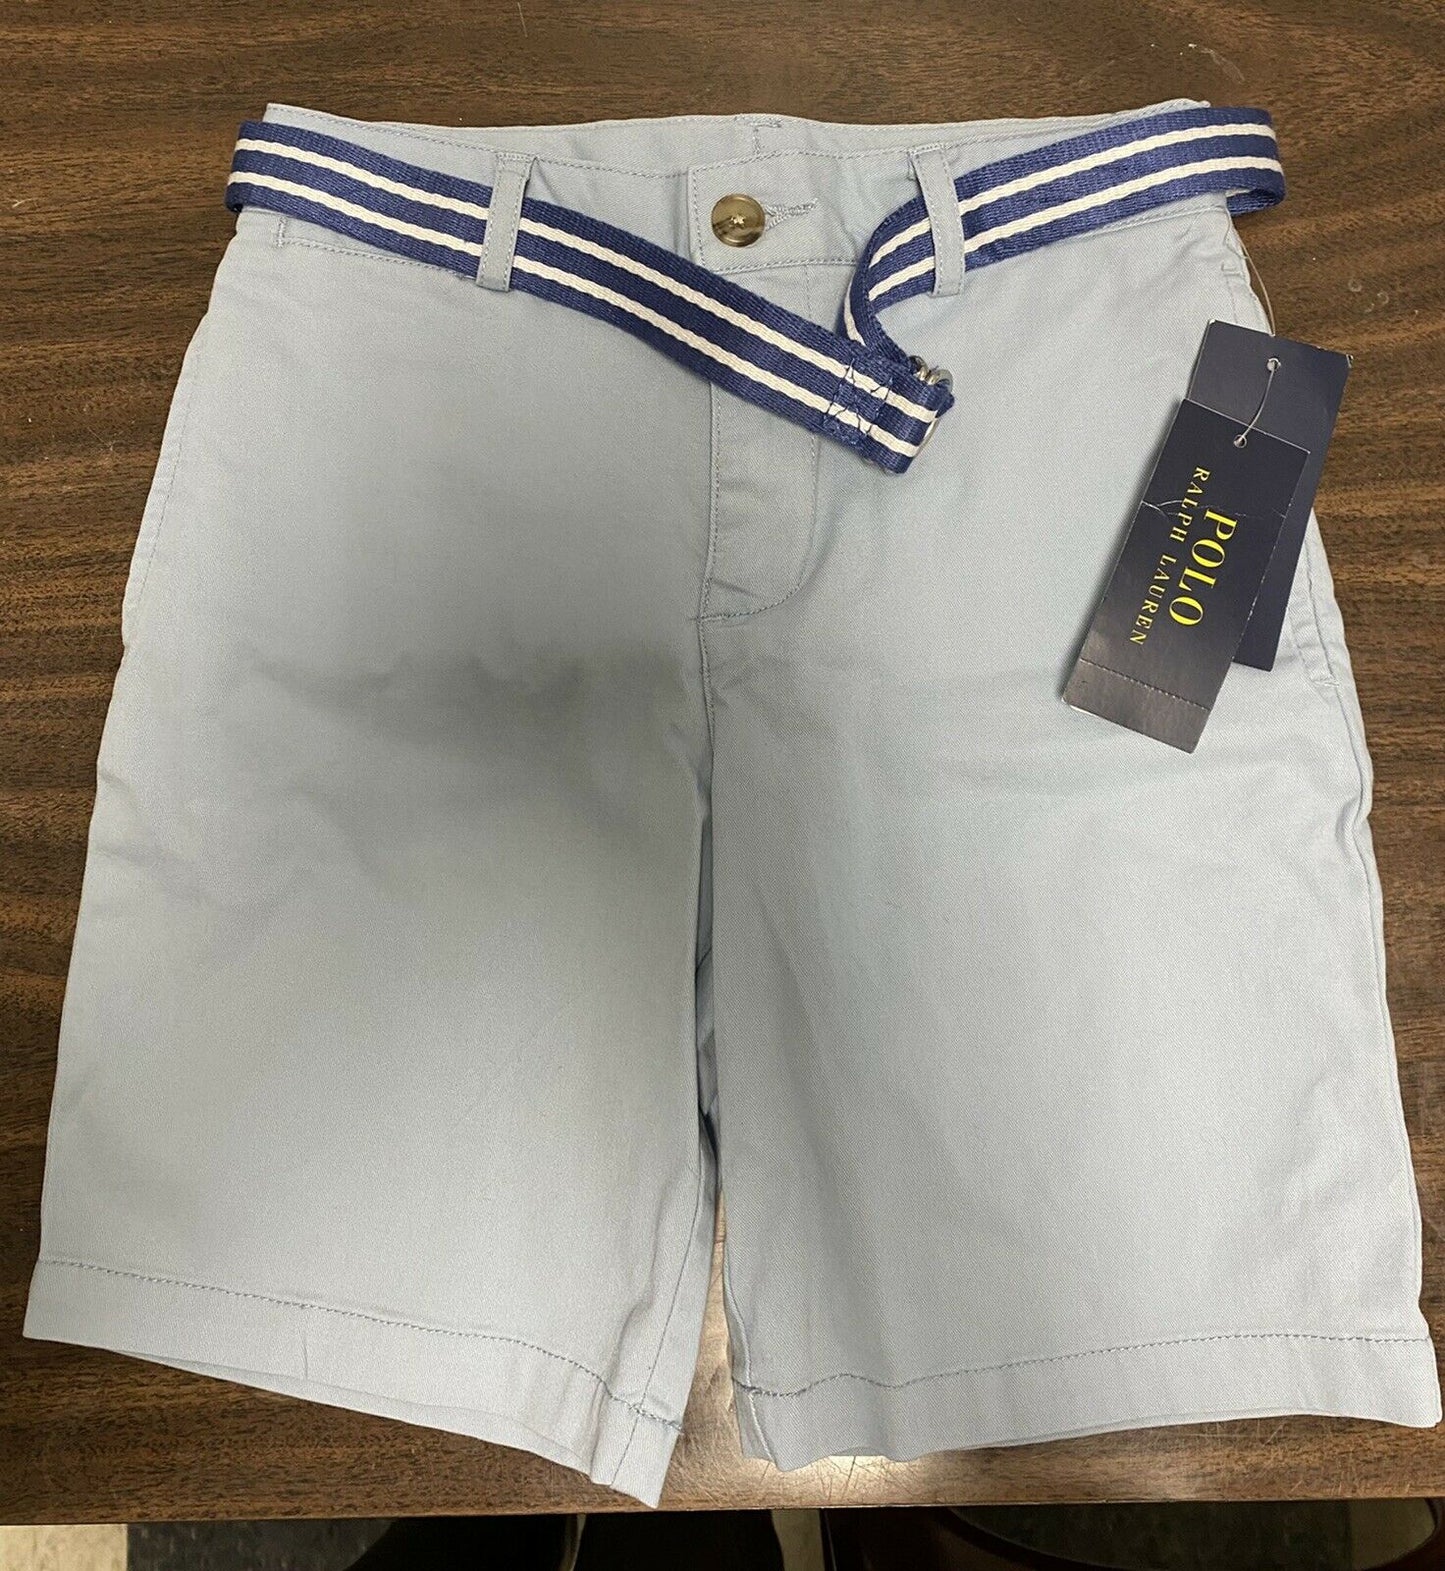 Polo Ralph Lauren Boys' Suffield Belted Stretch Chino Shorts. Blue. Size 7. MSRP $50